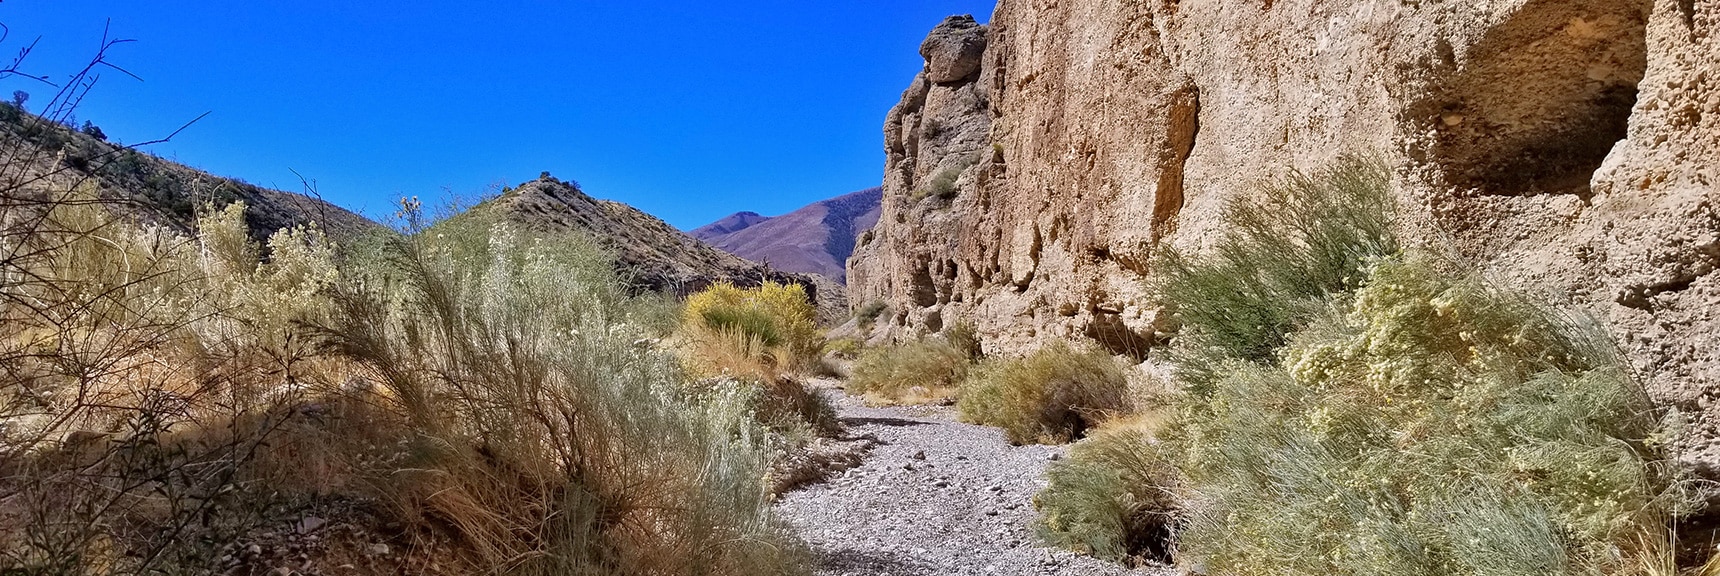 Emerging From the Upper End of the Slot Canyon | Harris Springs Canyon | Biking from Centennial Hills | Spring Mountains, Nevada